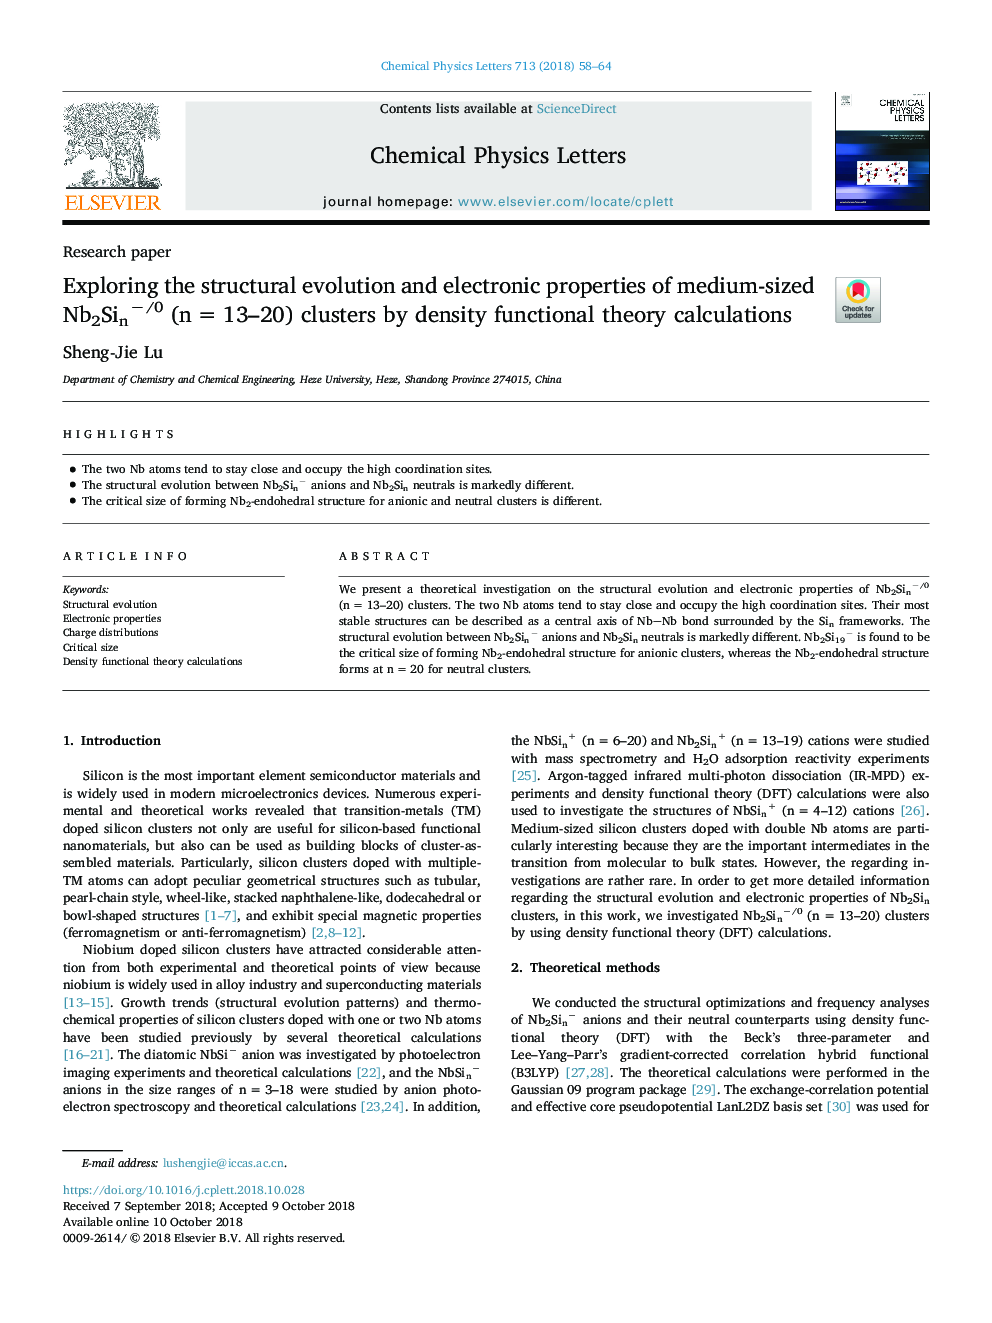 Exploring the structural evolution and electronic properties of medium-sized Nb2Sinâ/0 (nâ¯=â¯13-20) clusters by density functional theory calculations